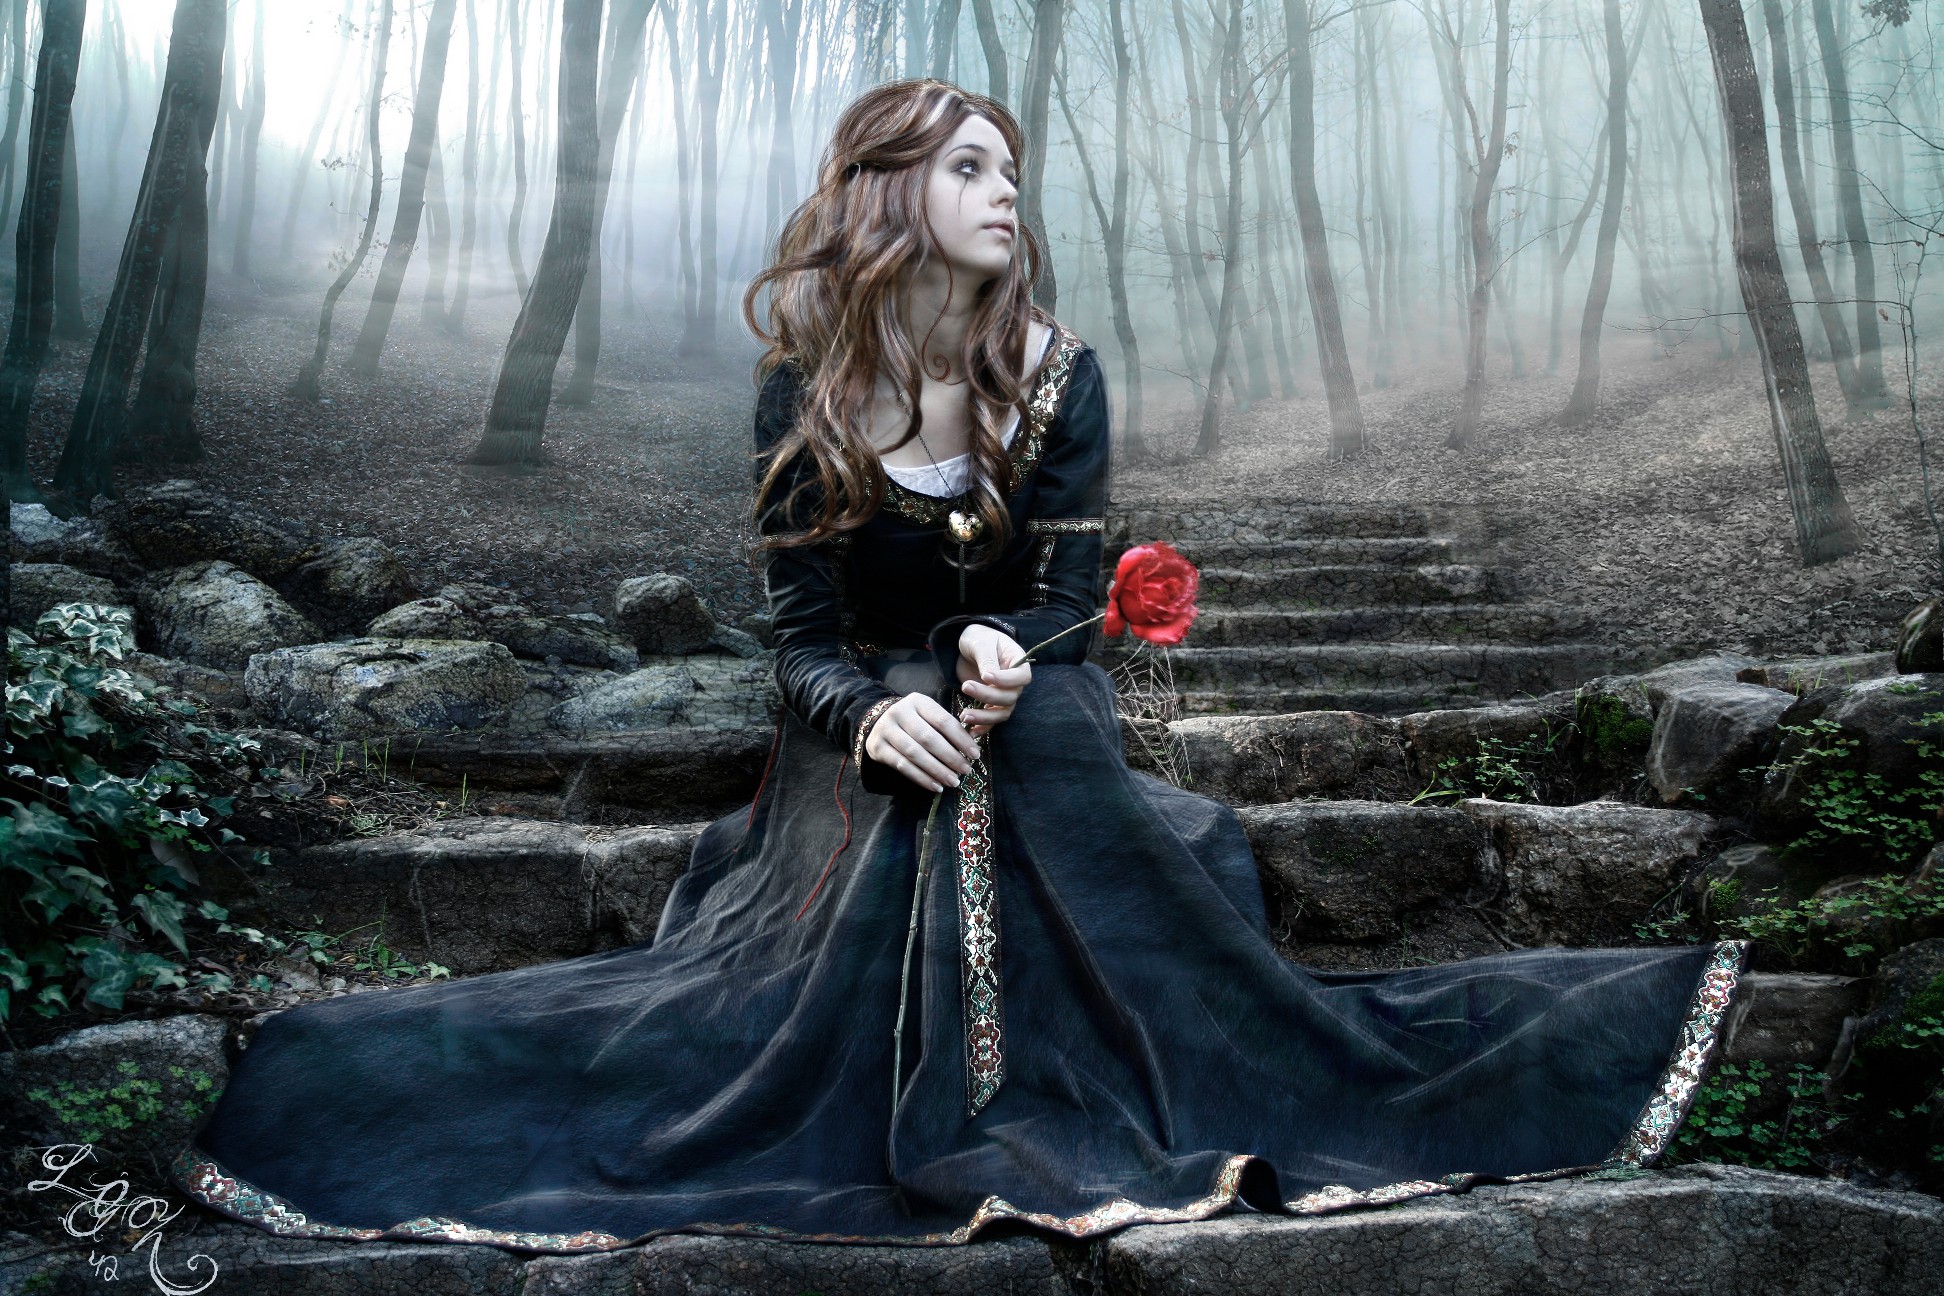 People 1944x1296 women women outdoors costumes brunette long hair blue dress Conceptual sadness crying tears looking away fantasy girl rose flowers plants sitting sad dress watermarked